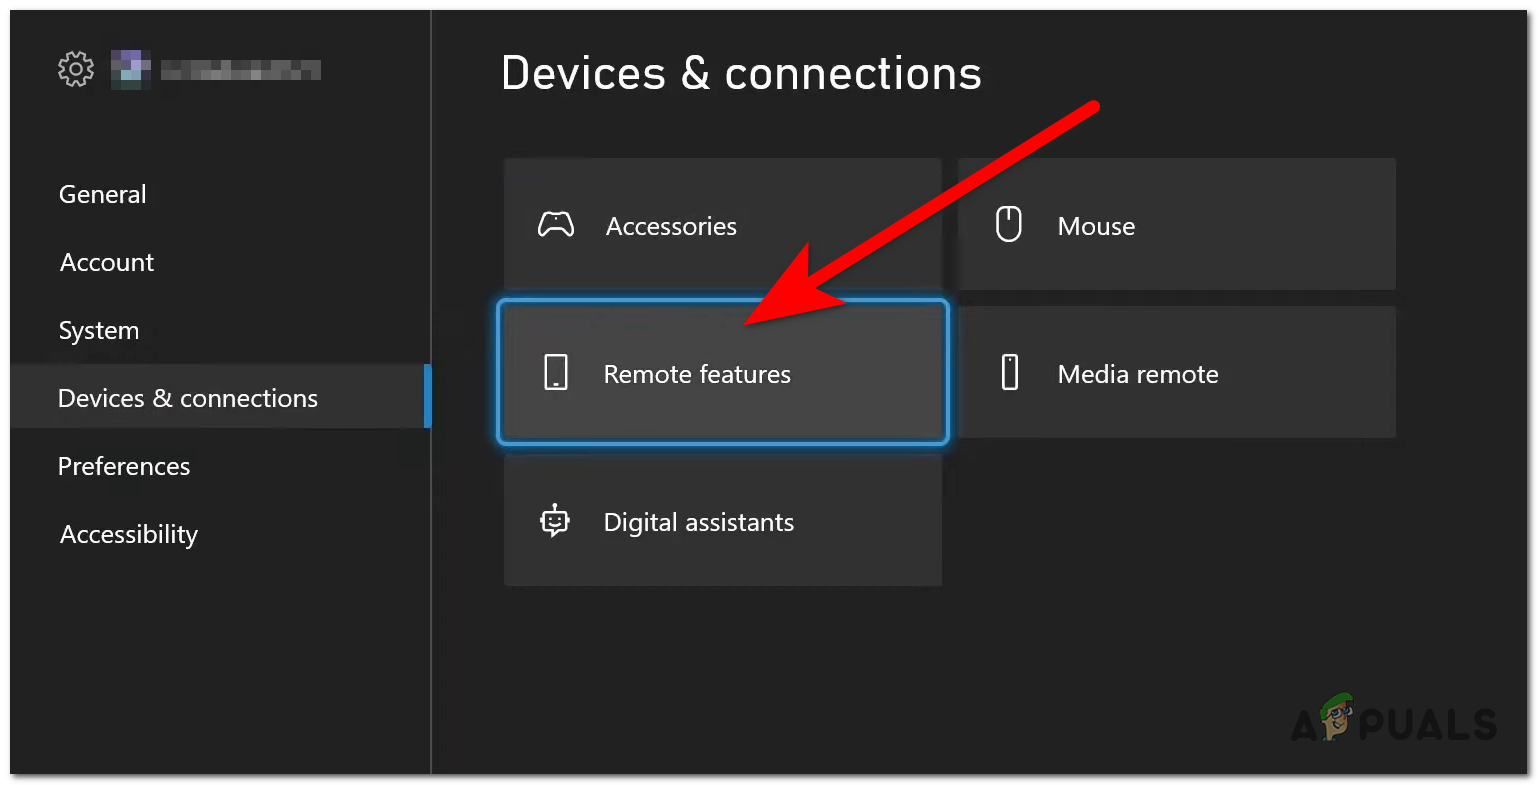 Accessing the Remote features settings